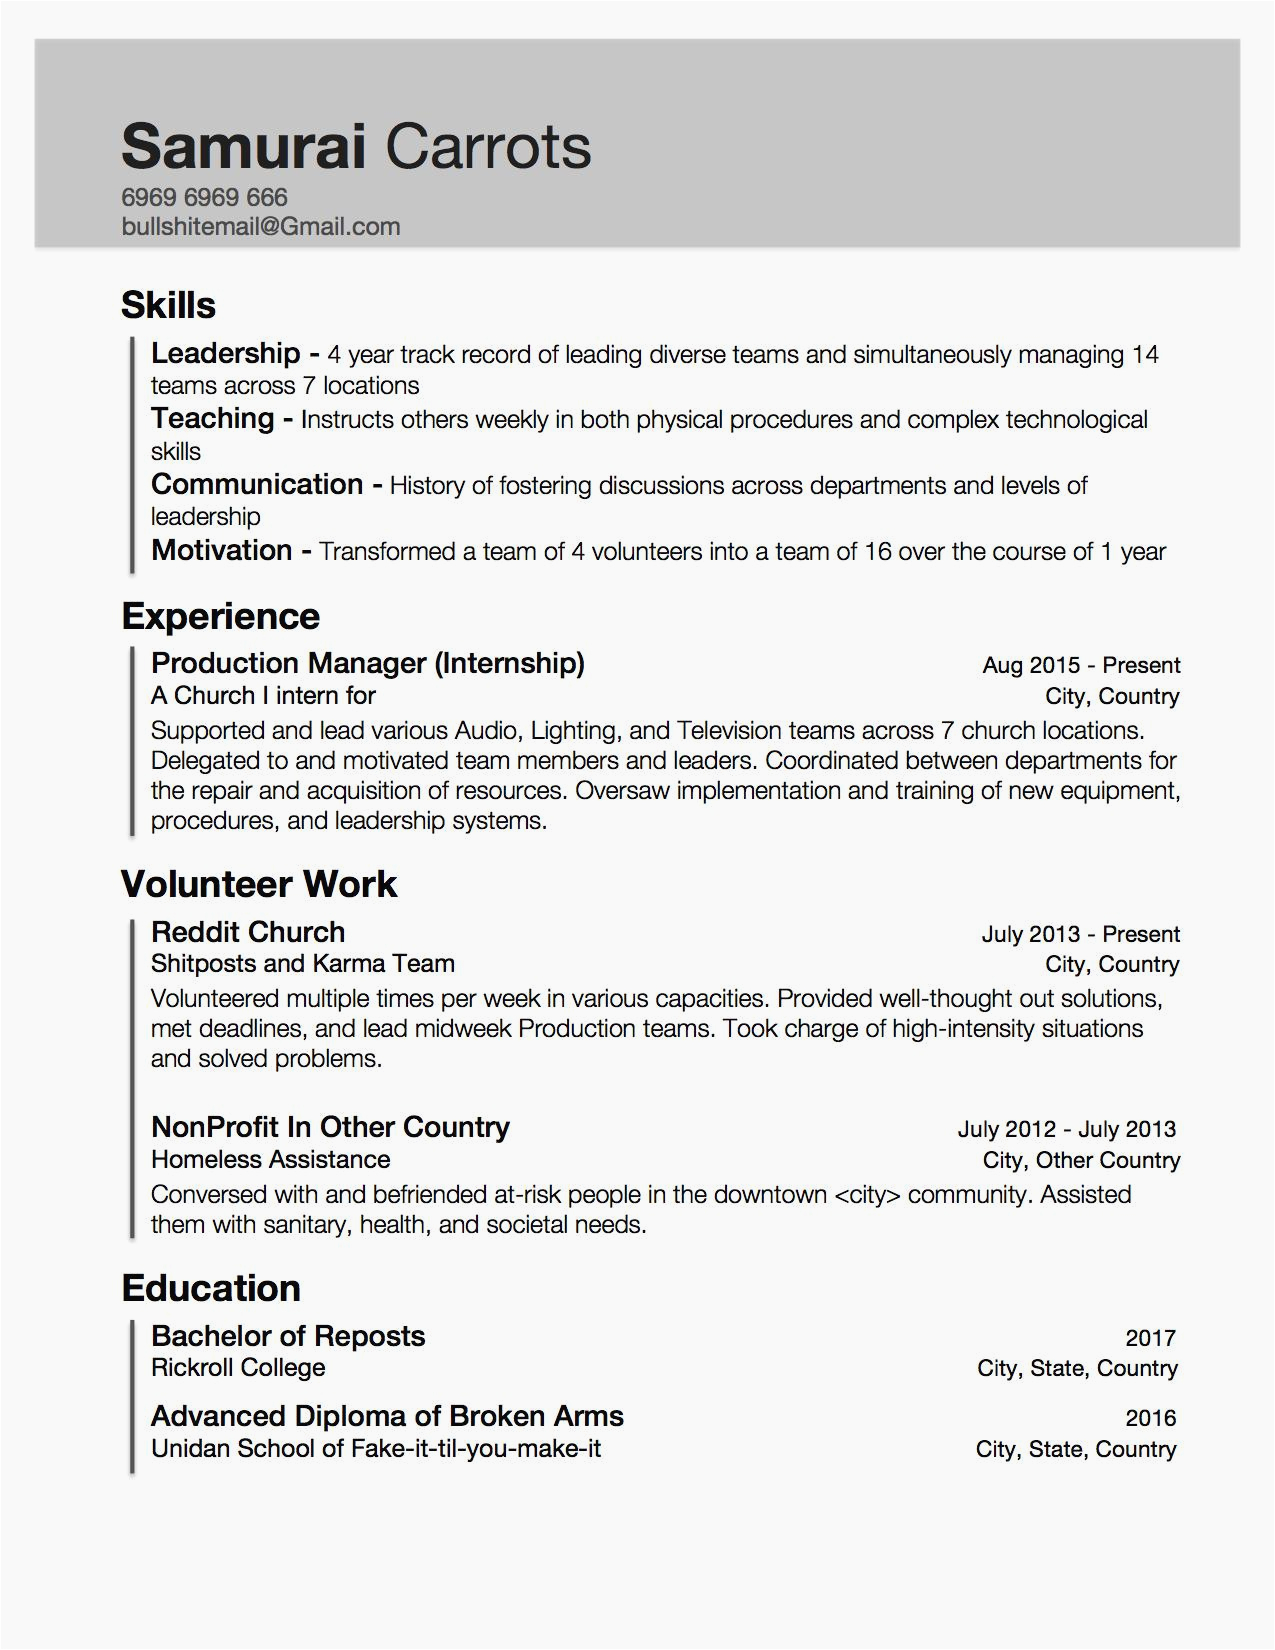 resume samples with little work experience